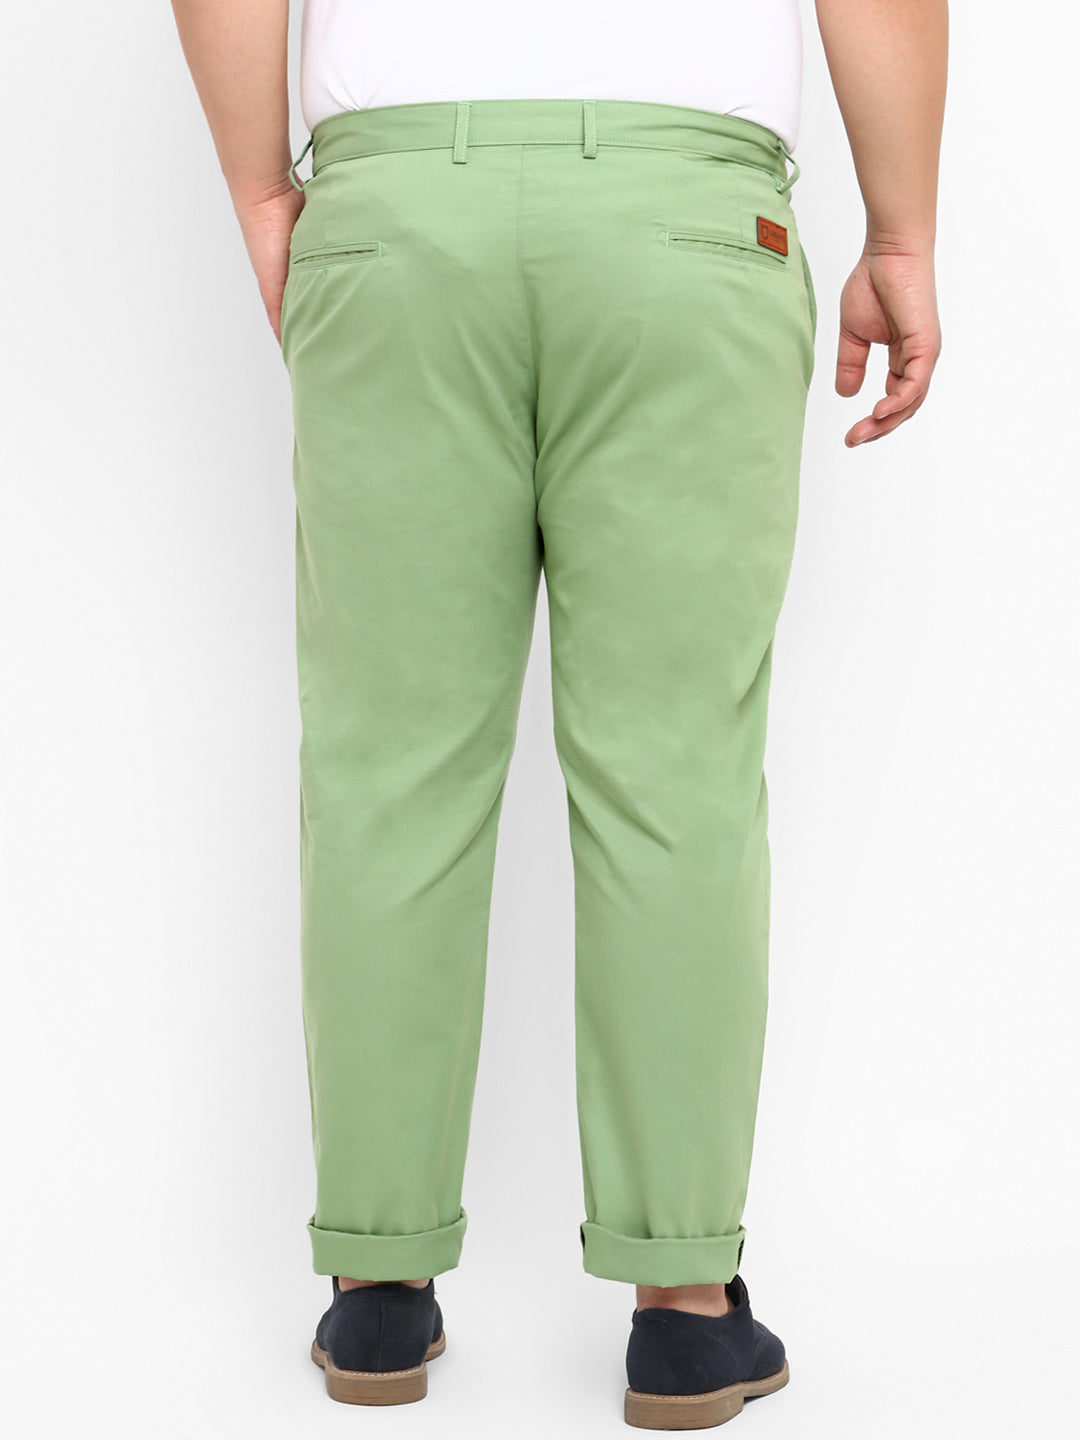 Urbano Plus Men's Green Cotton Light Weight Non-Stretch Regular Fit Casual Trousers